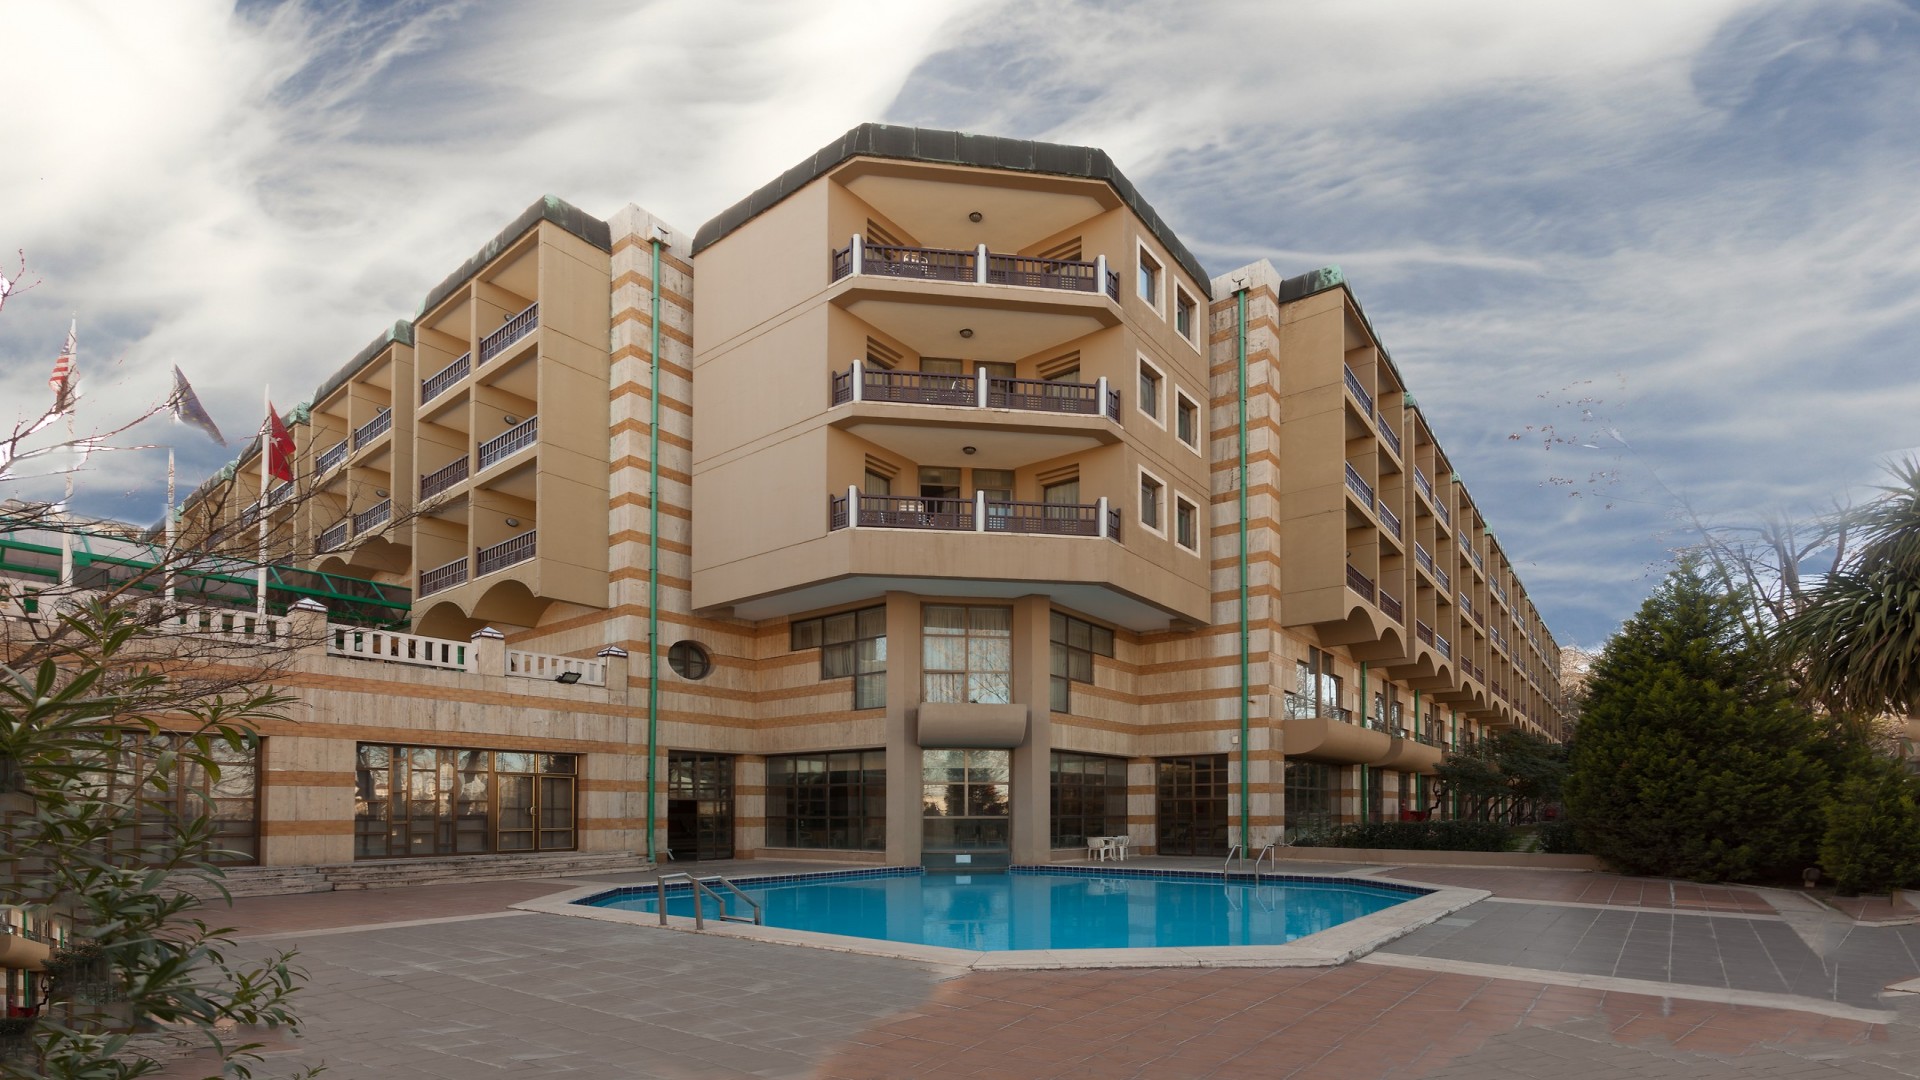 Kervansaray Thermal Convention Center Spa